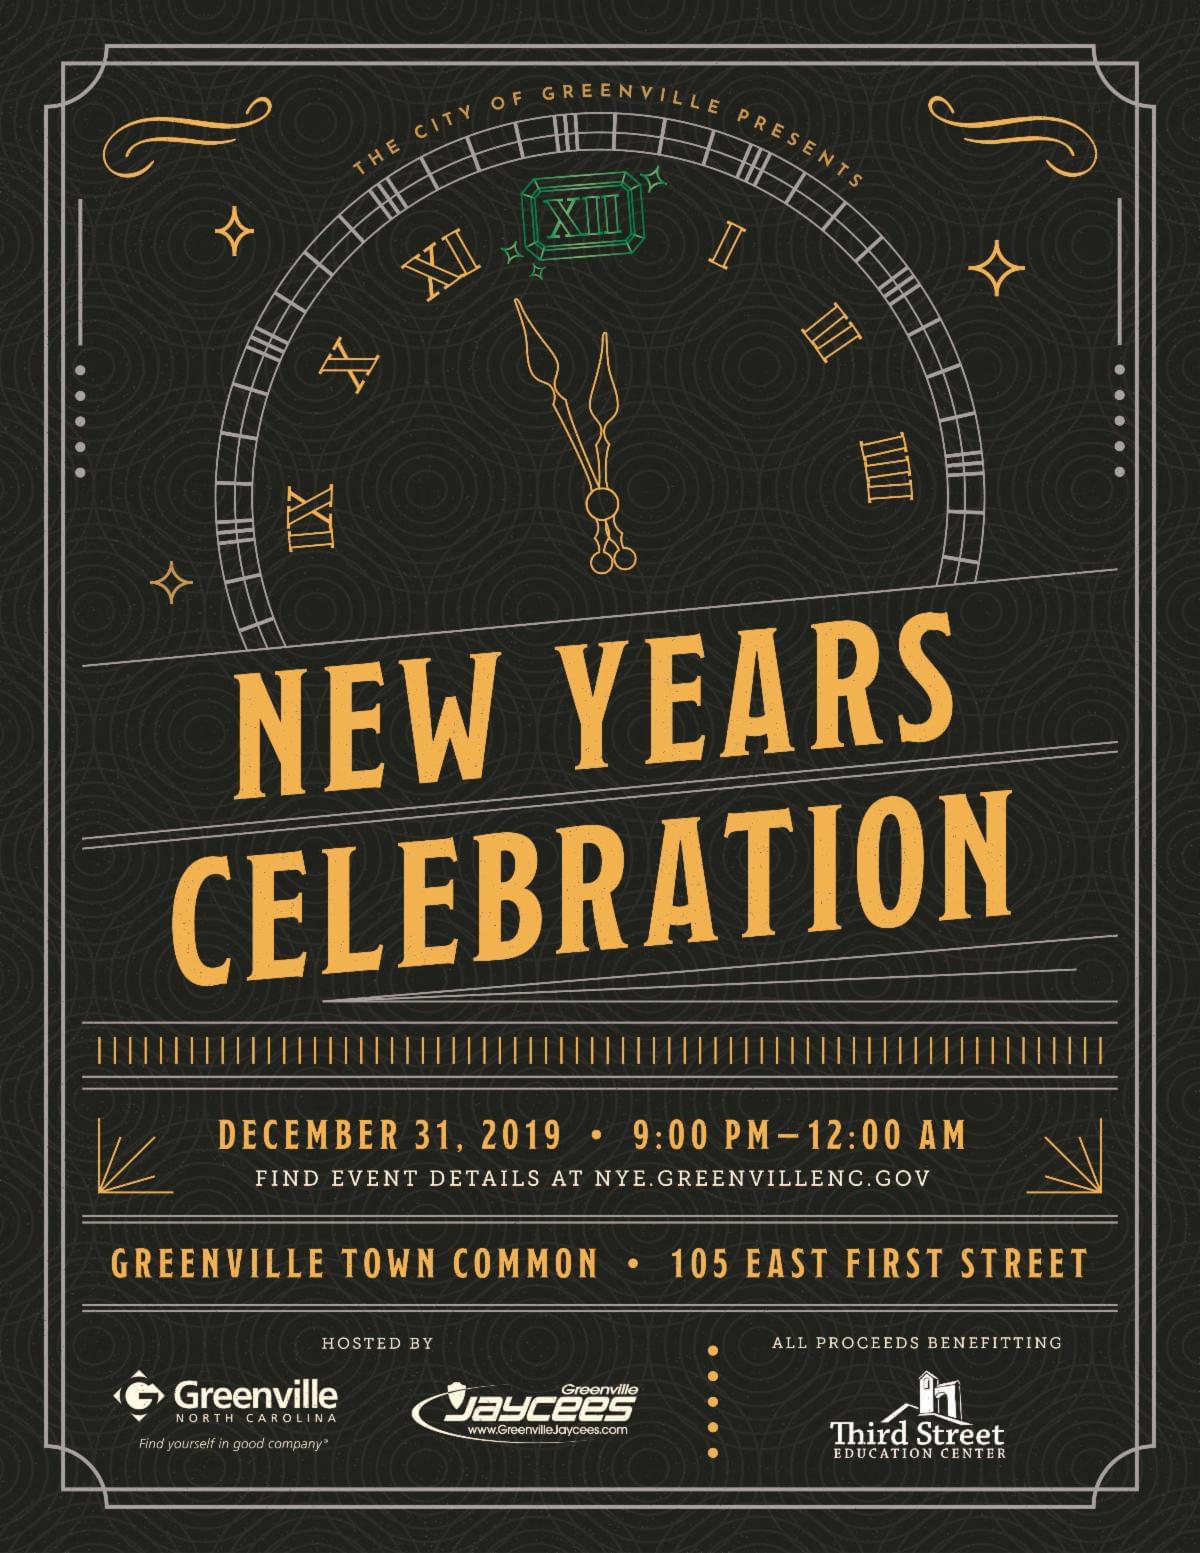 New Years EVE CELEBRATION GREENVILLE